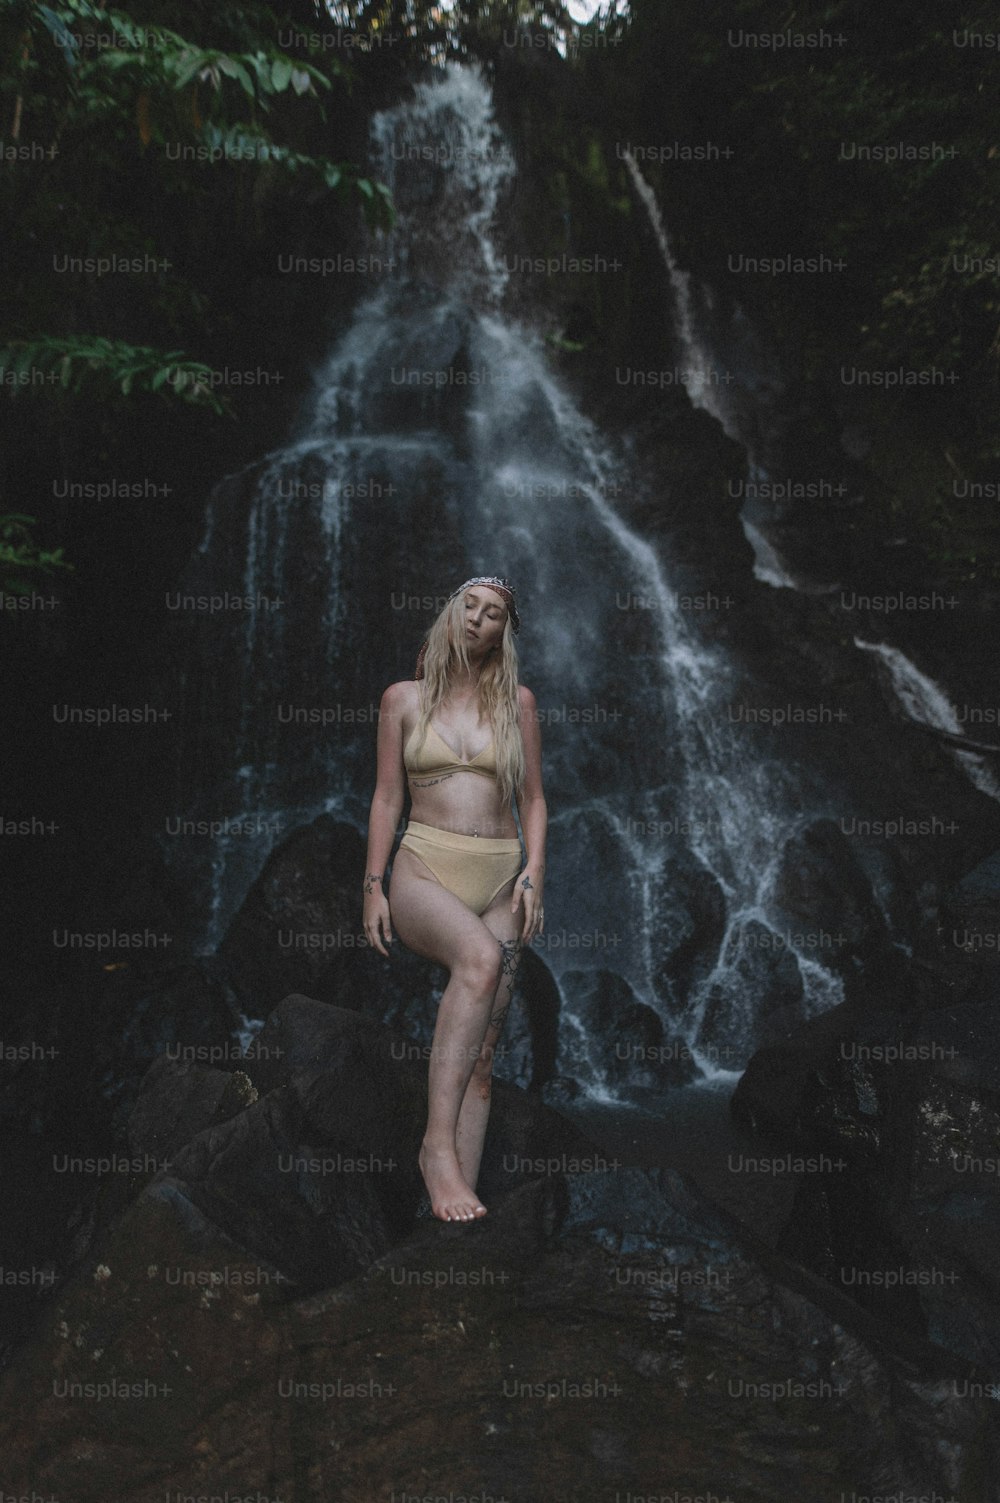 a woman in a bikini standing in front of a waterfall